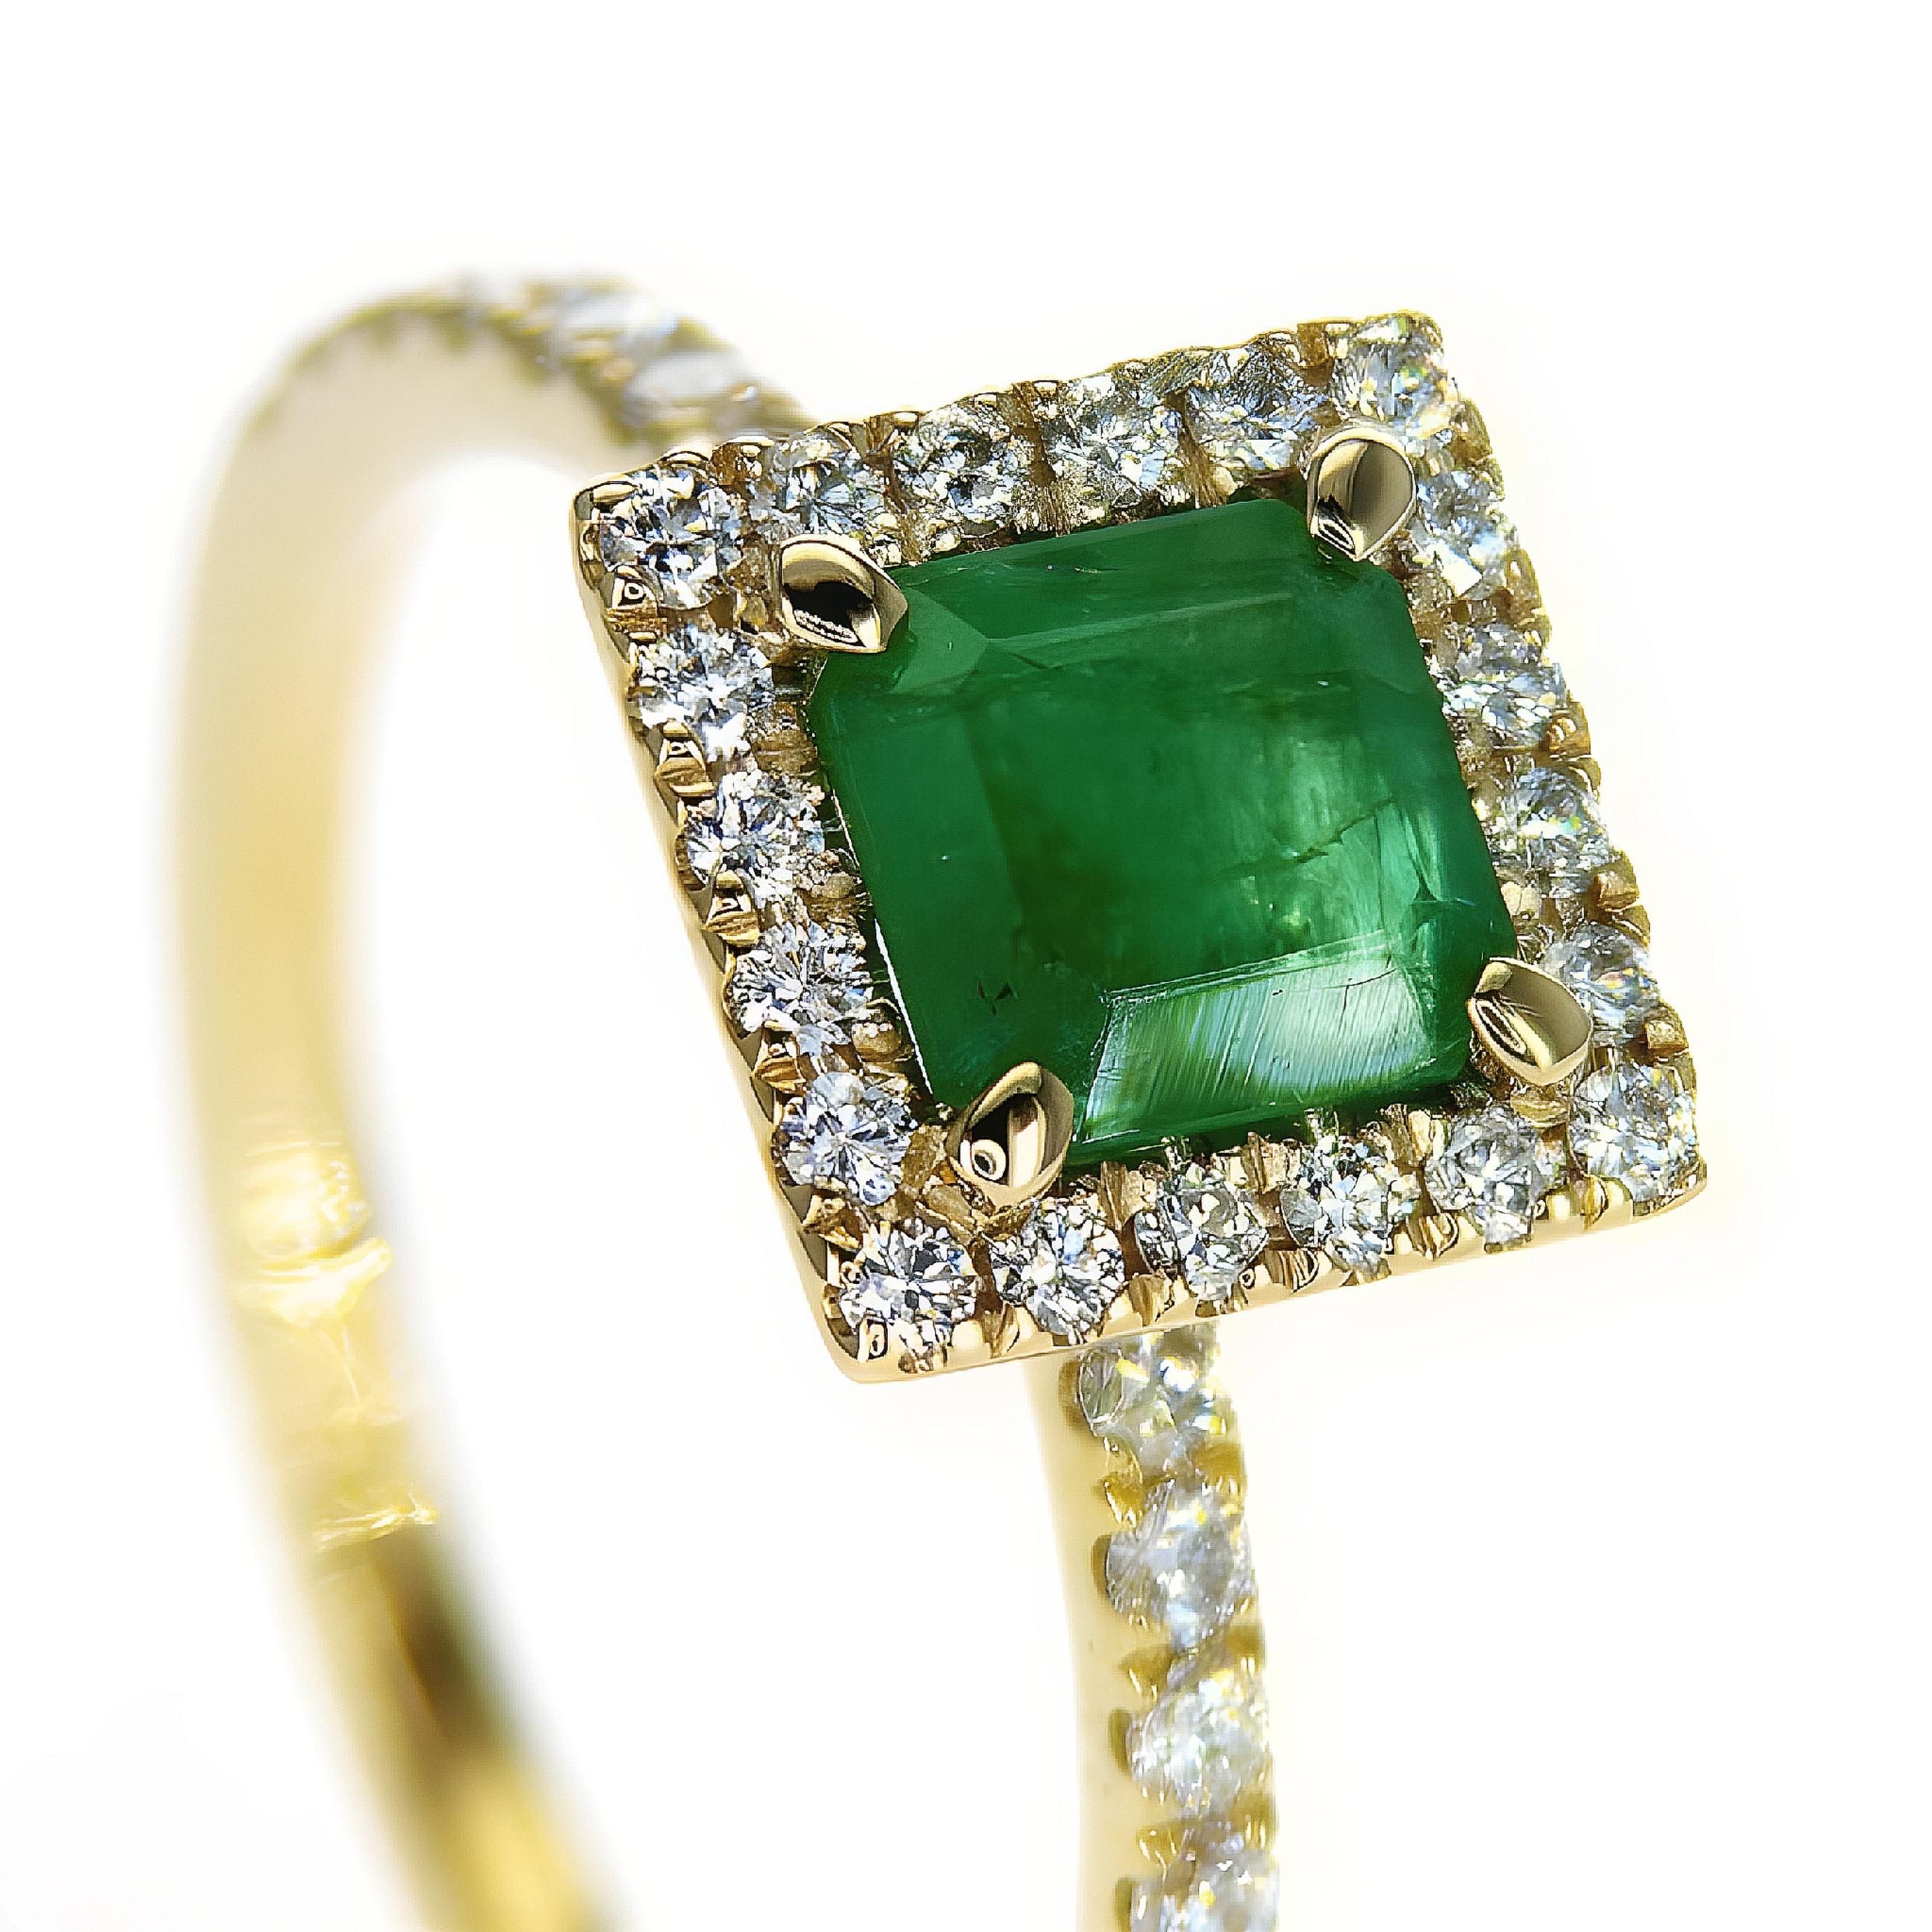 Square Emerald and diamonds halo classic ring- Dazzling 14K Natural Emeralds & Diamonds Creation

Product Description:

Discover the sheer elegance of our Square Emerald and diamonds halo classic ring, a luxurious piece skillfully sculpted from